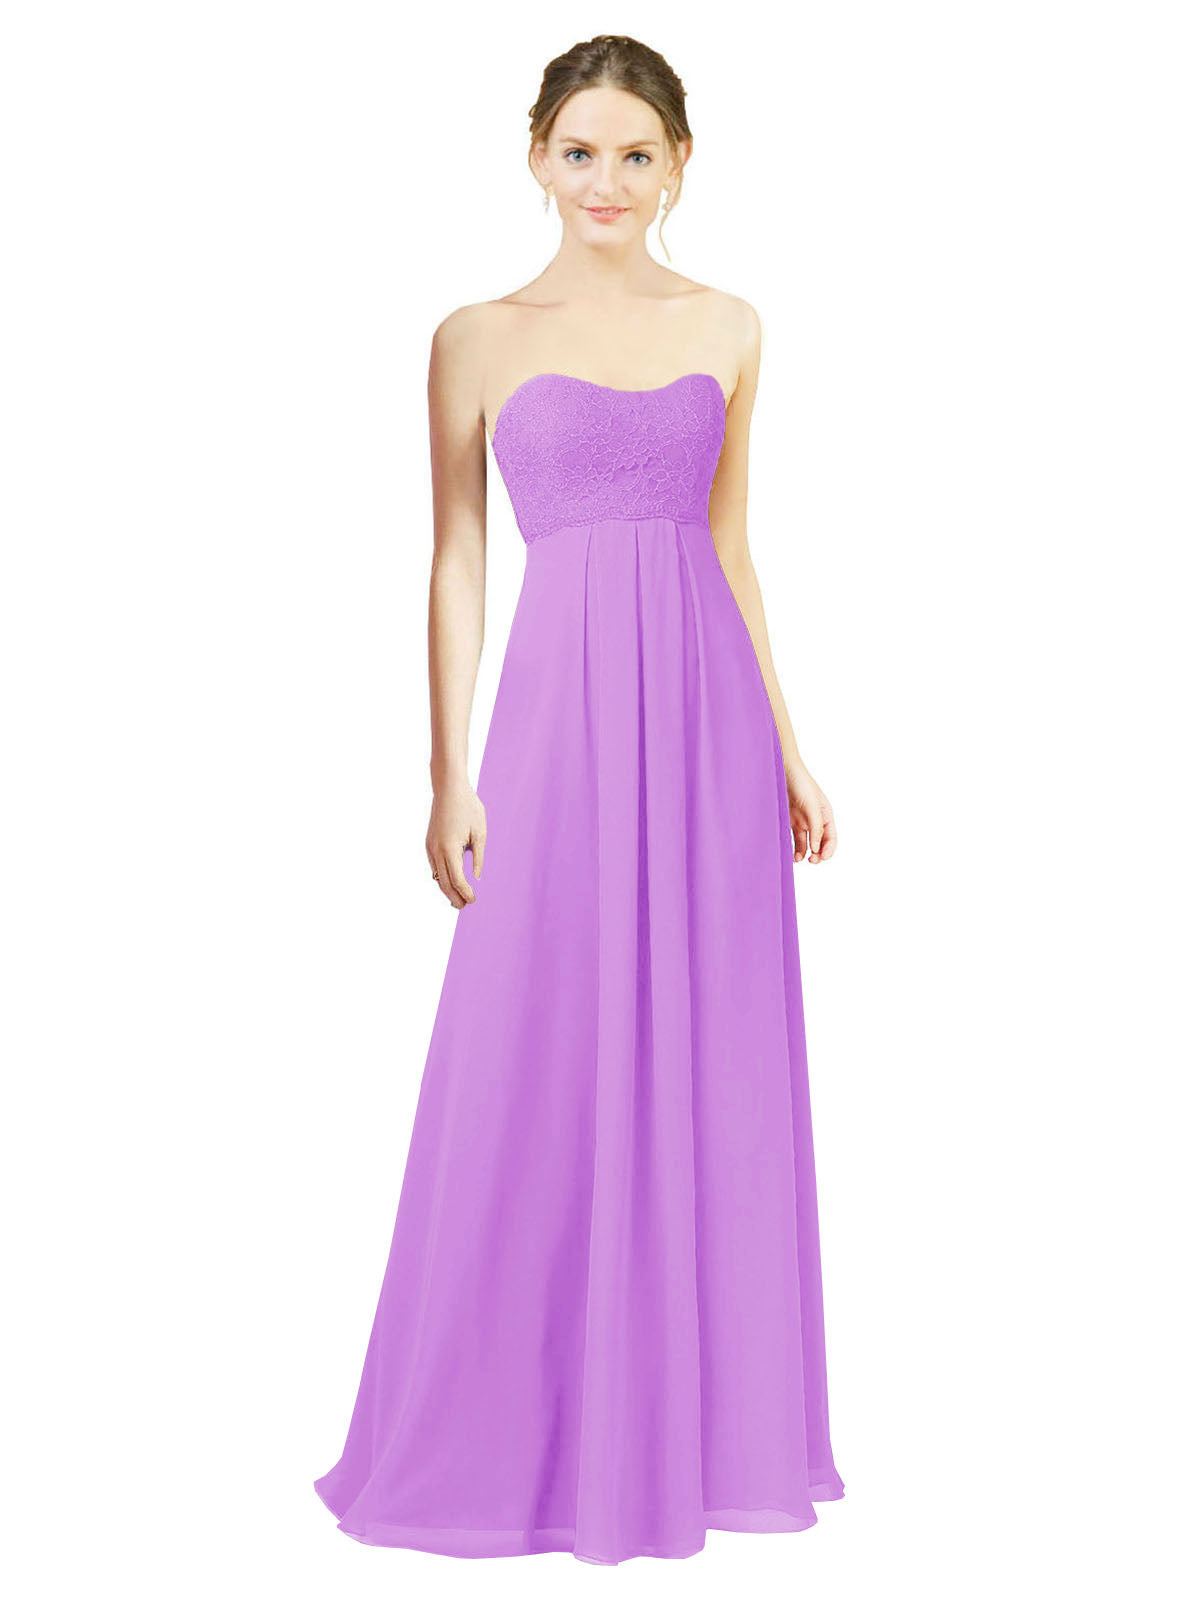 Violet A-Line Sweetheart Strapless Long Bridesmaid Dress Melany